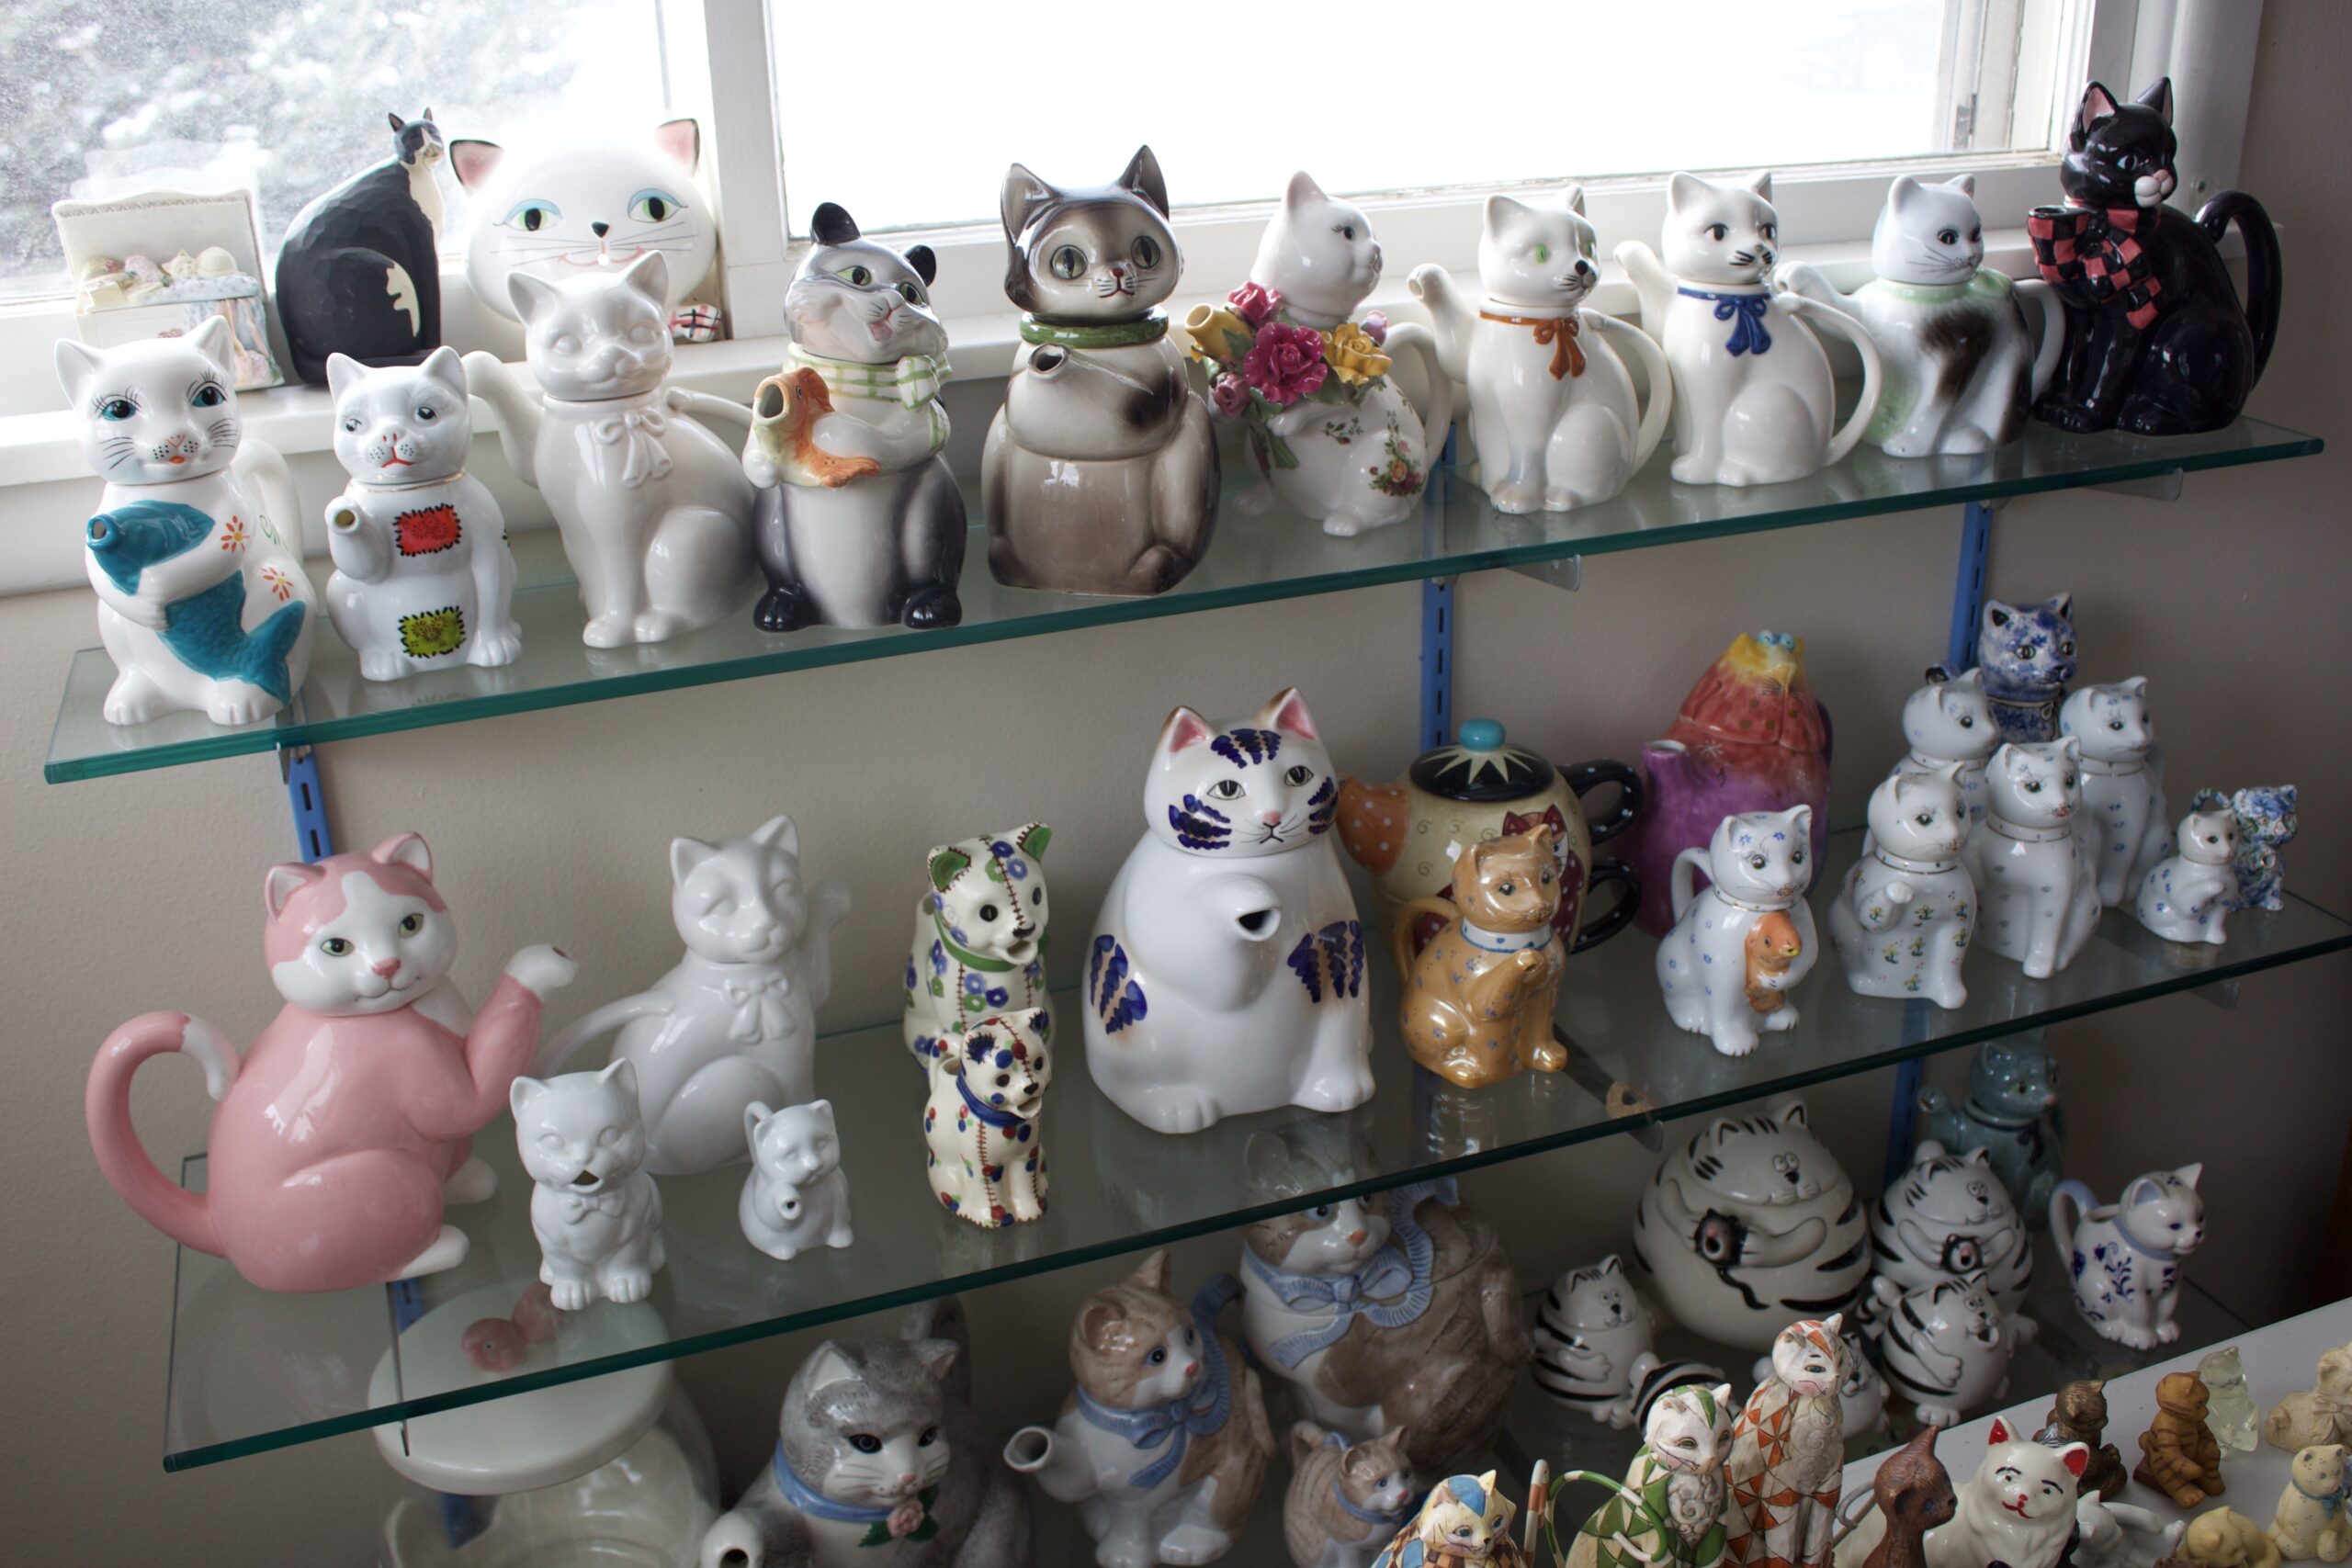 Inside Redner's Rescued Cat Figurine Mewseum are thousands cat-related items, including cookie jars. (Trina La Susa/WPR)